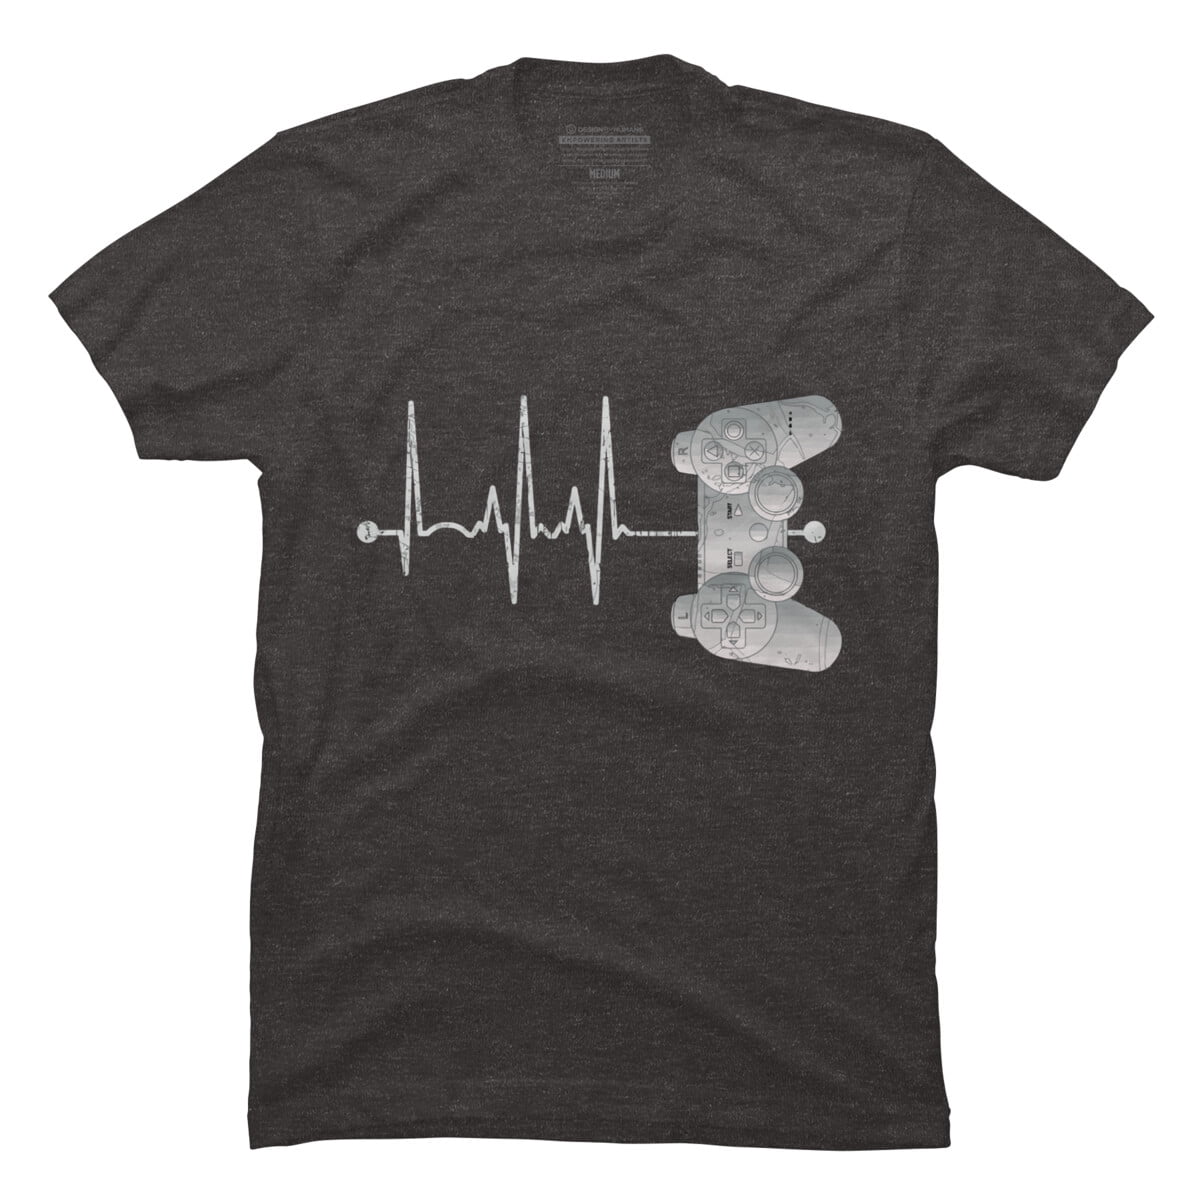 Gamer Heartbeat Teenage Boys Gifts Ideas Gaming Mens Charcoal Heather Gray Graphic Tee - Design By Humans  XL